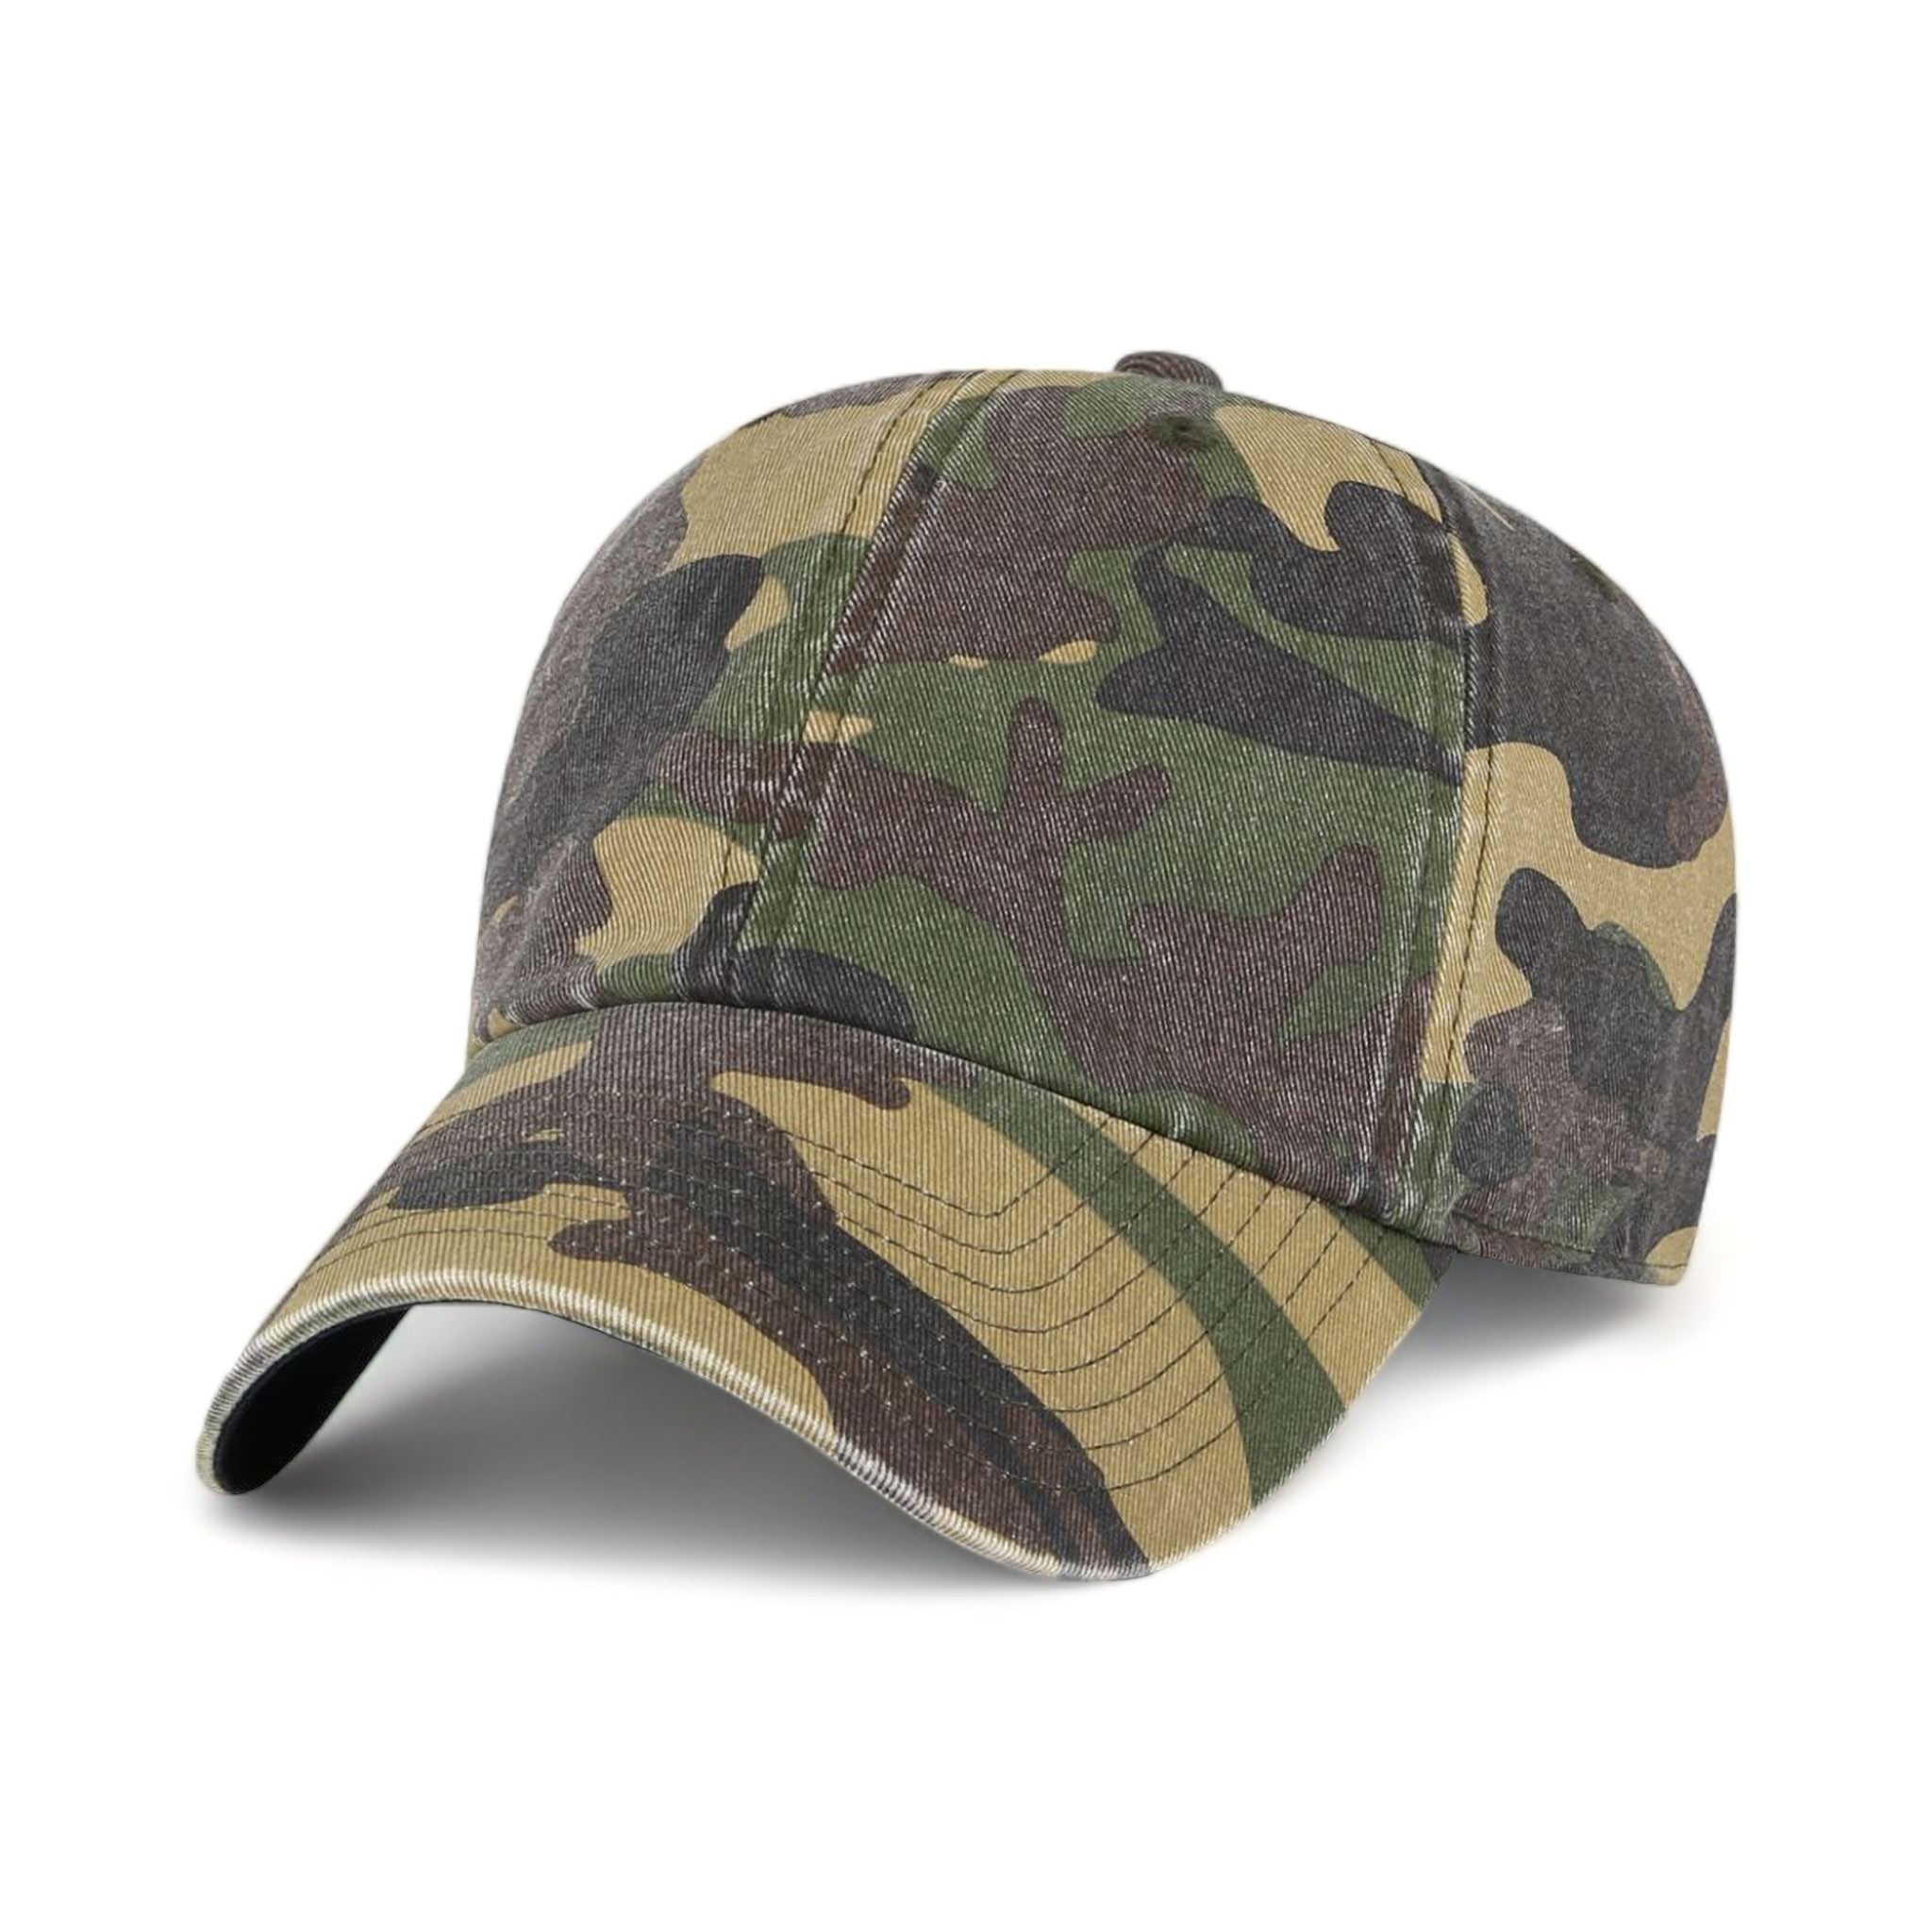 Front view of 47 Brand 4700 custom hat in camo green